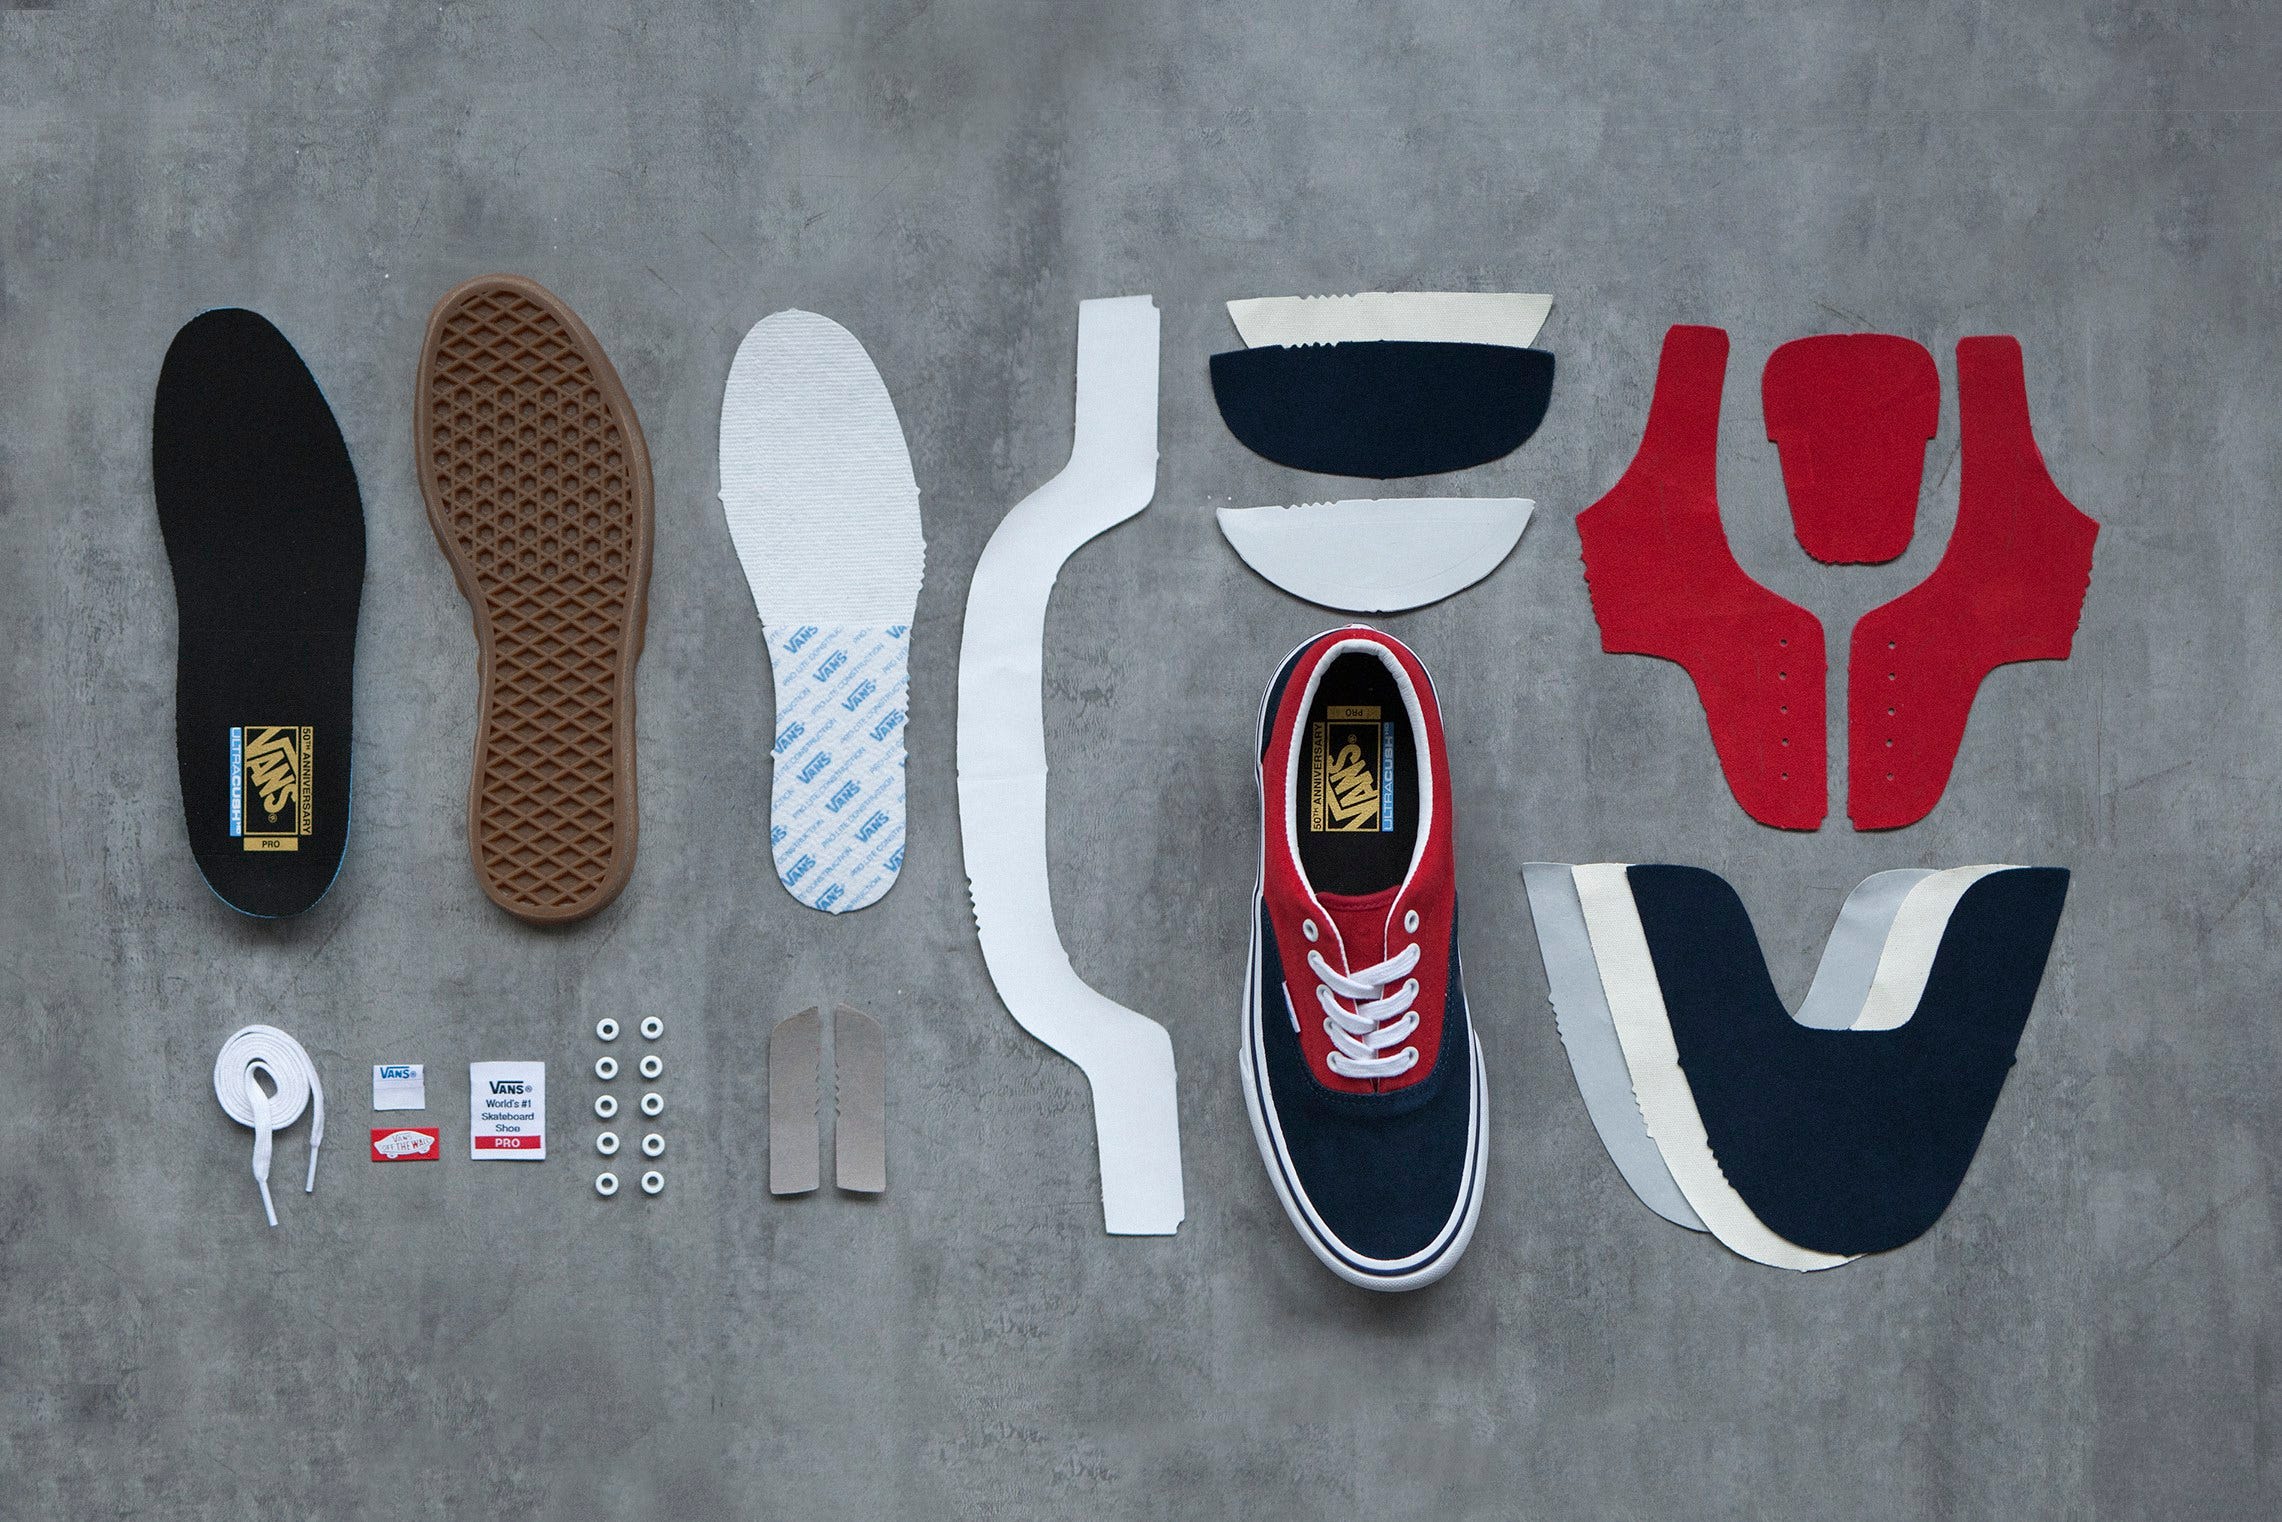 OFF THE WALL. The story behind Vans | by Greg Milani | Medium